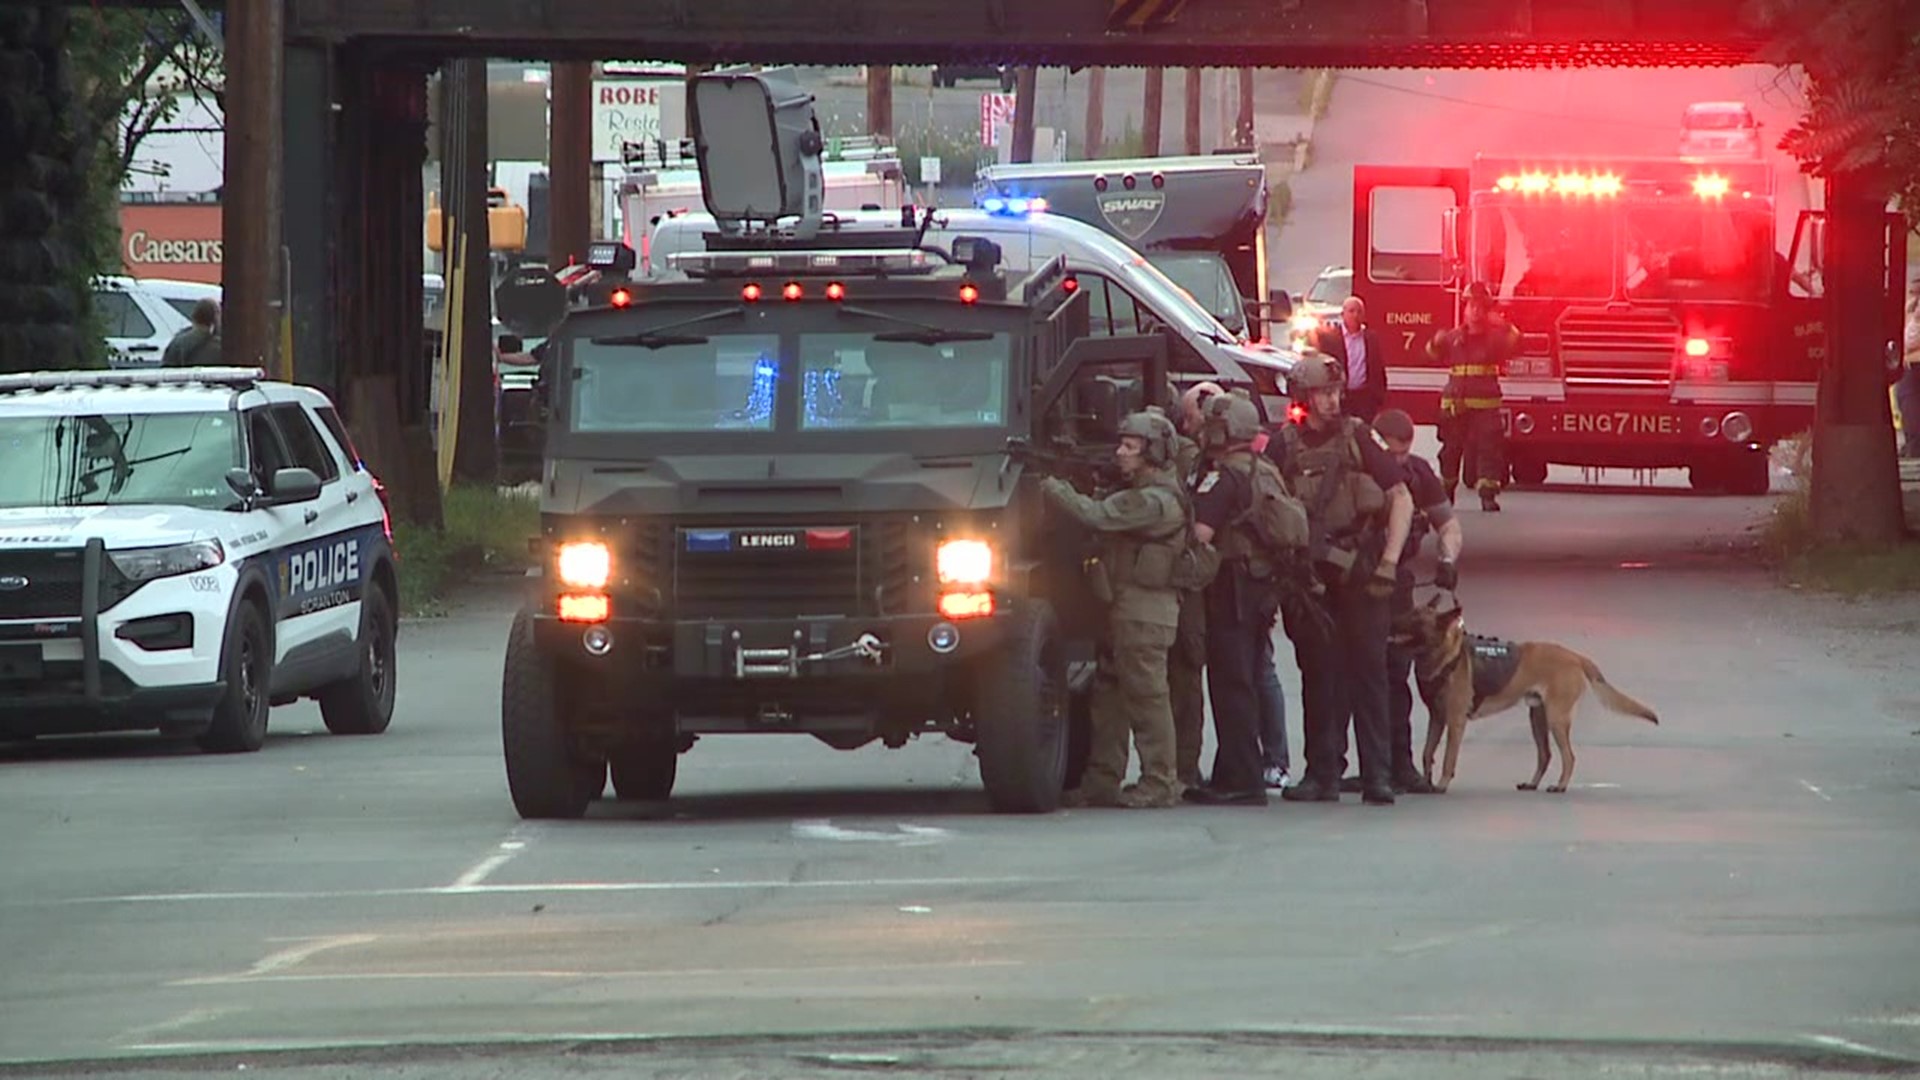 Officers, a SWAT team, and other emergency responders blocked off the area near a home on Luzerne Street.